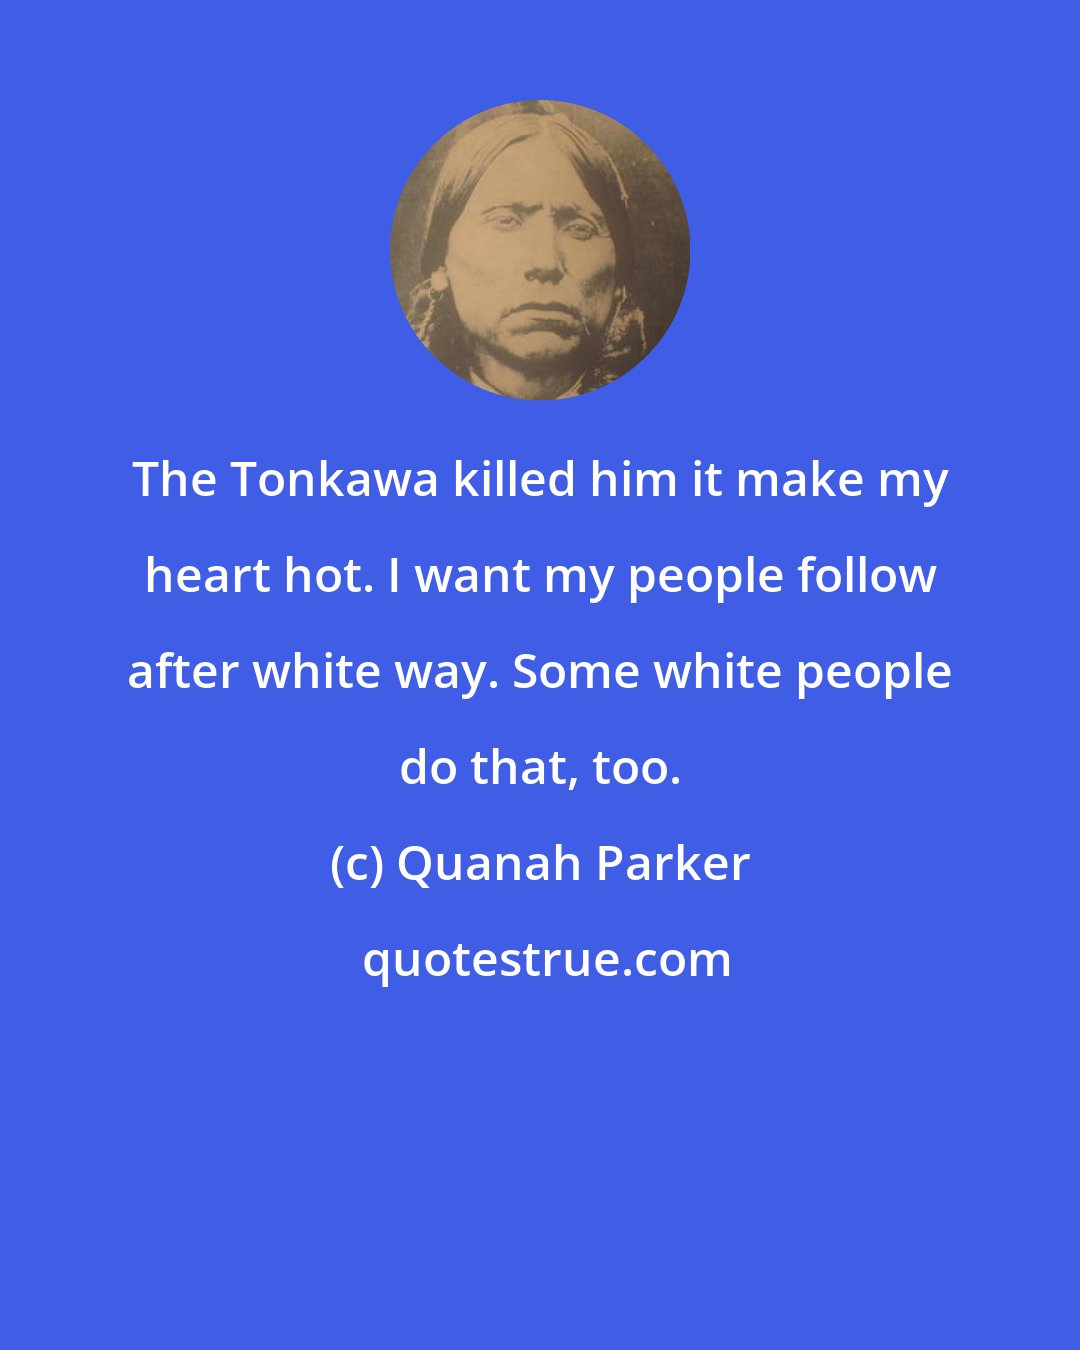 Quanah Parker: The Tonkawa killed him it make my heart hot. I want my people follow after white way. Some white people do that, too.